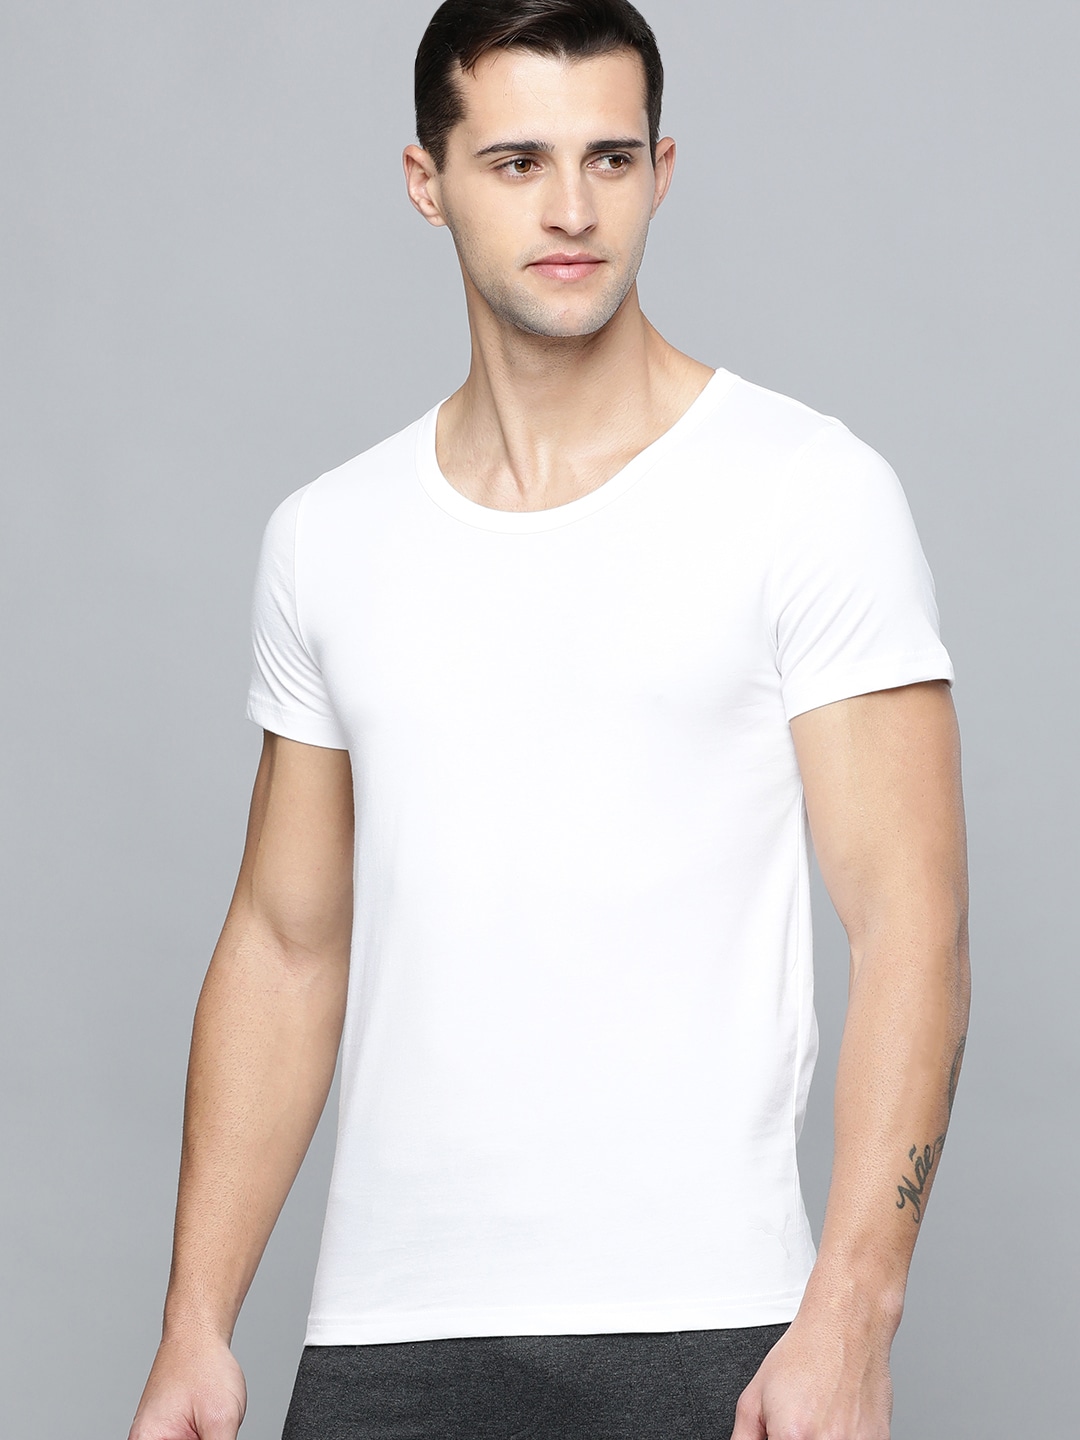 Clothing Innerwear Vests | Puma Men Pack of 2 White Solid Pure Cotton Basic Crew Innerwear Vests - GS37739